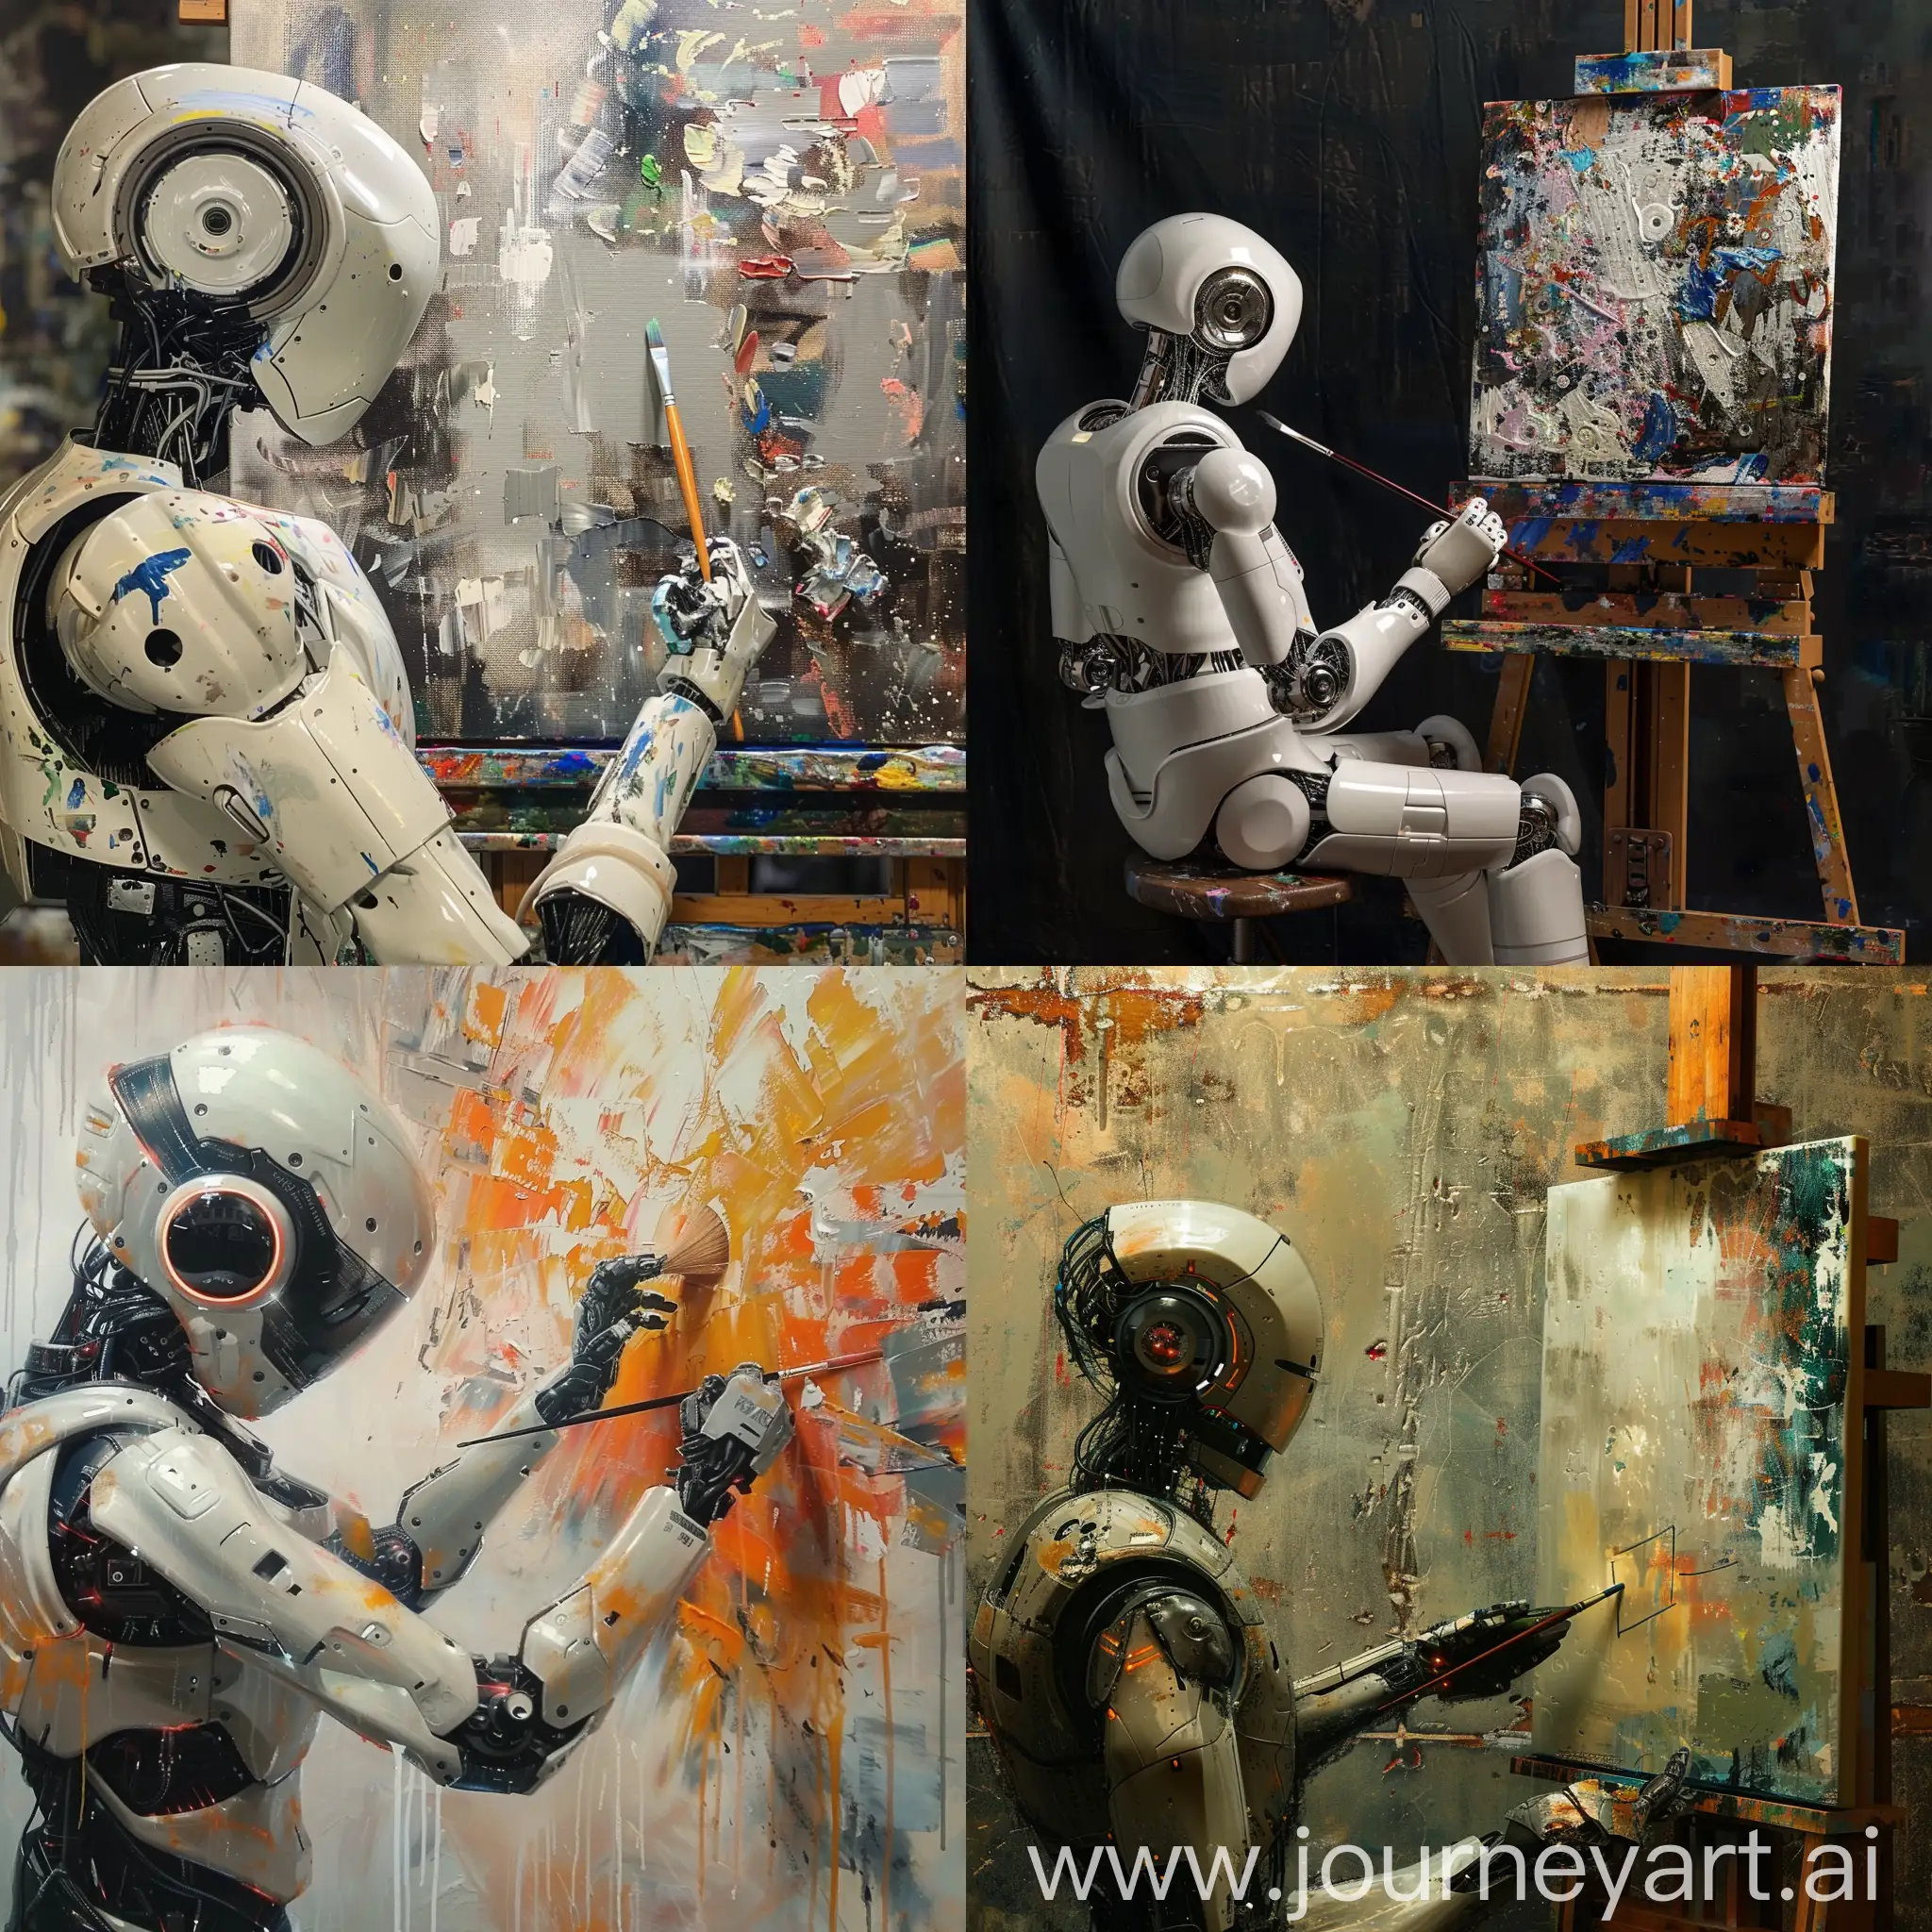 an image of how artificial intelligence would look like and how it would paint a painting